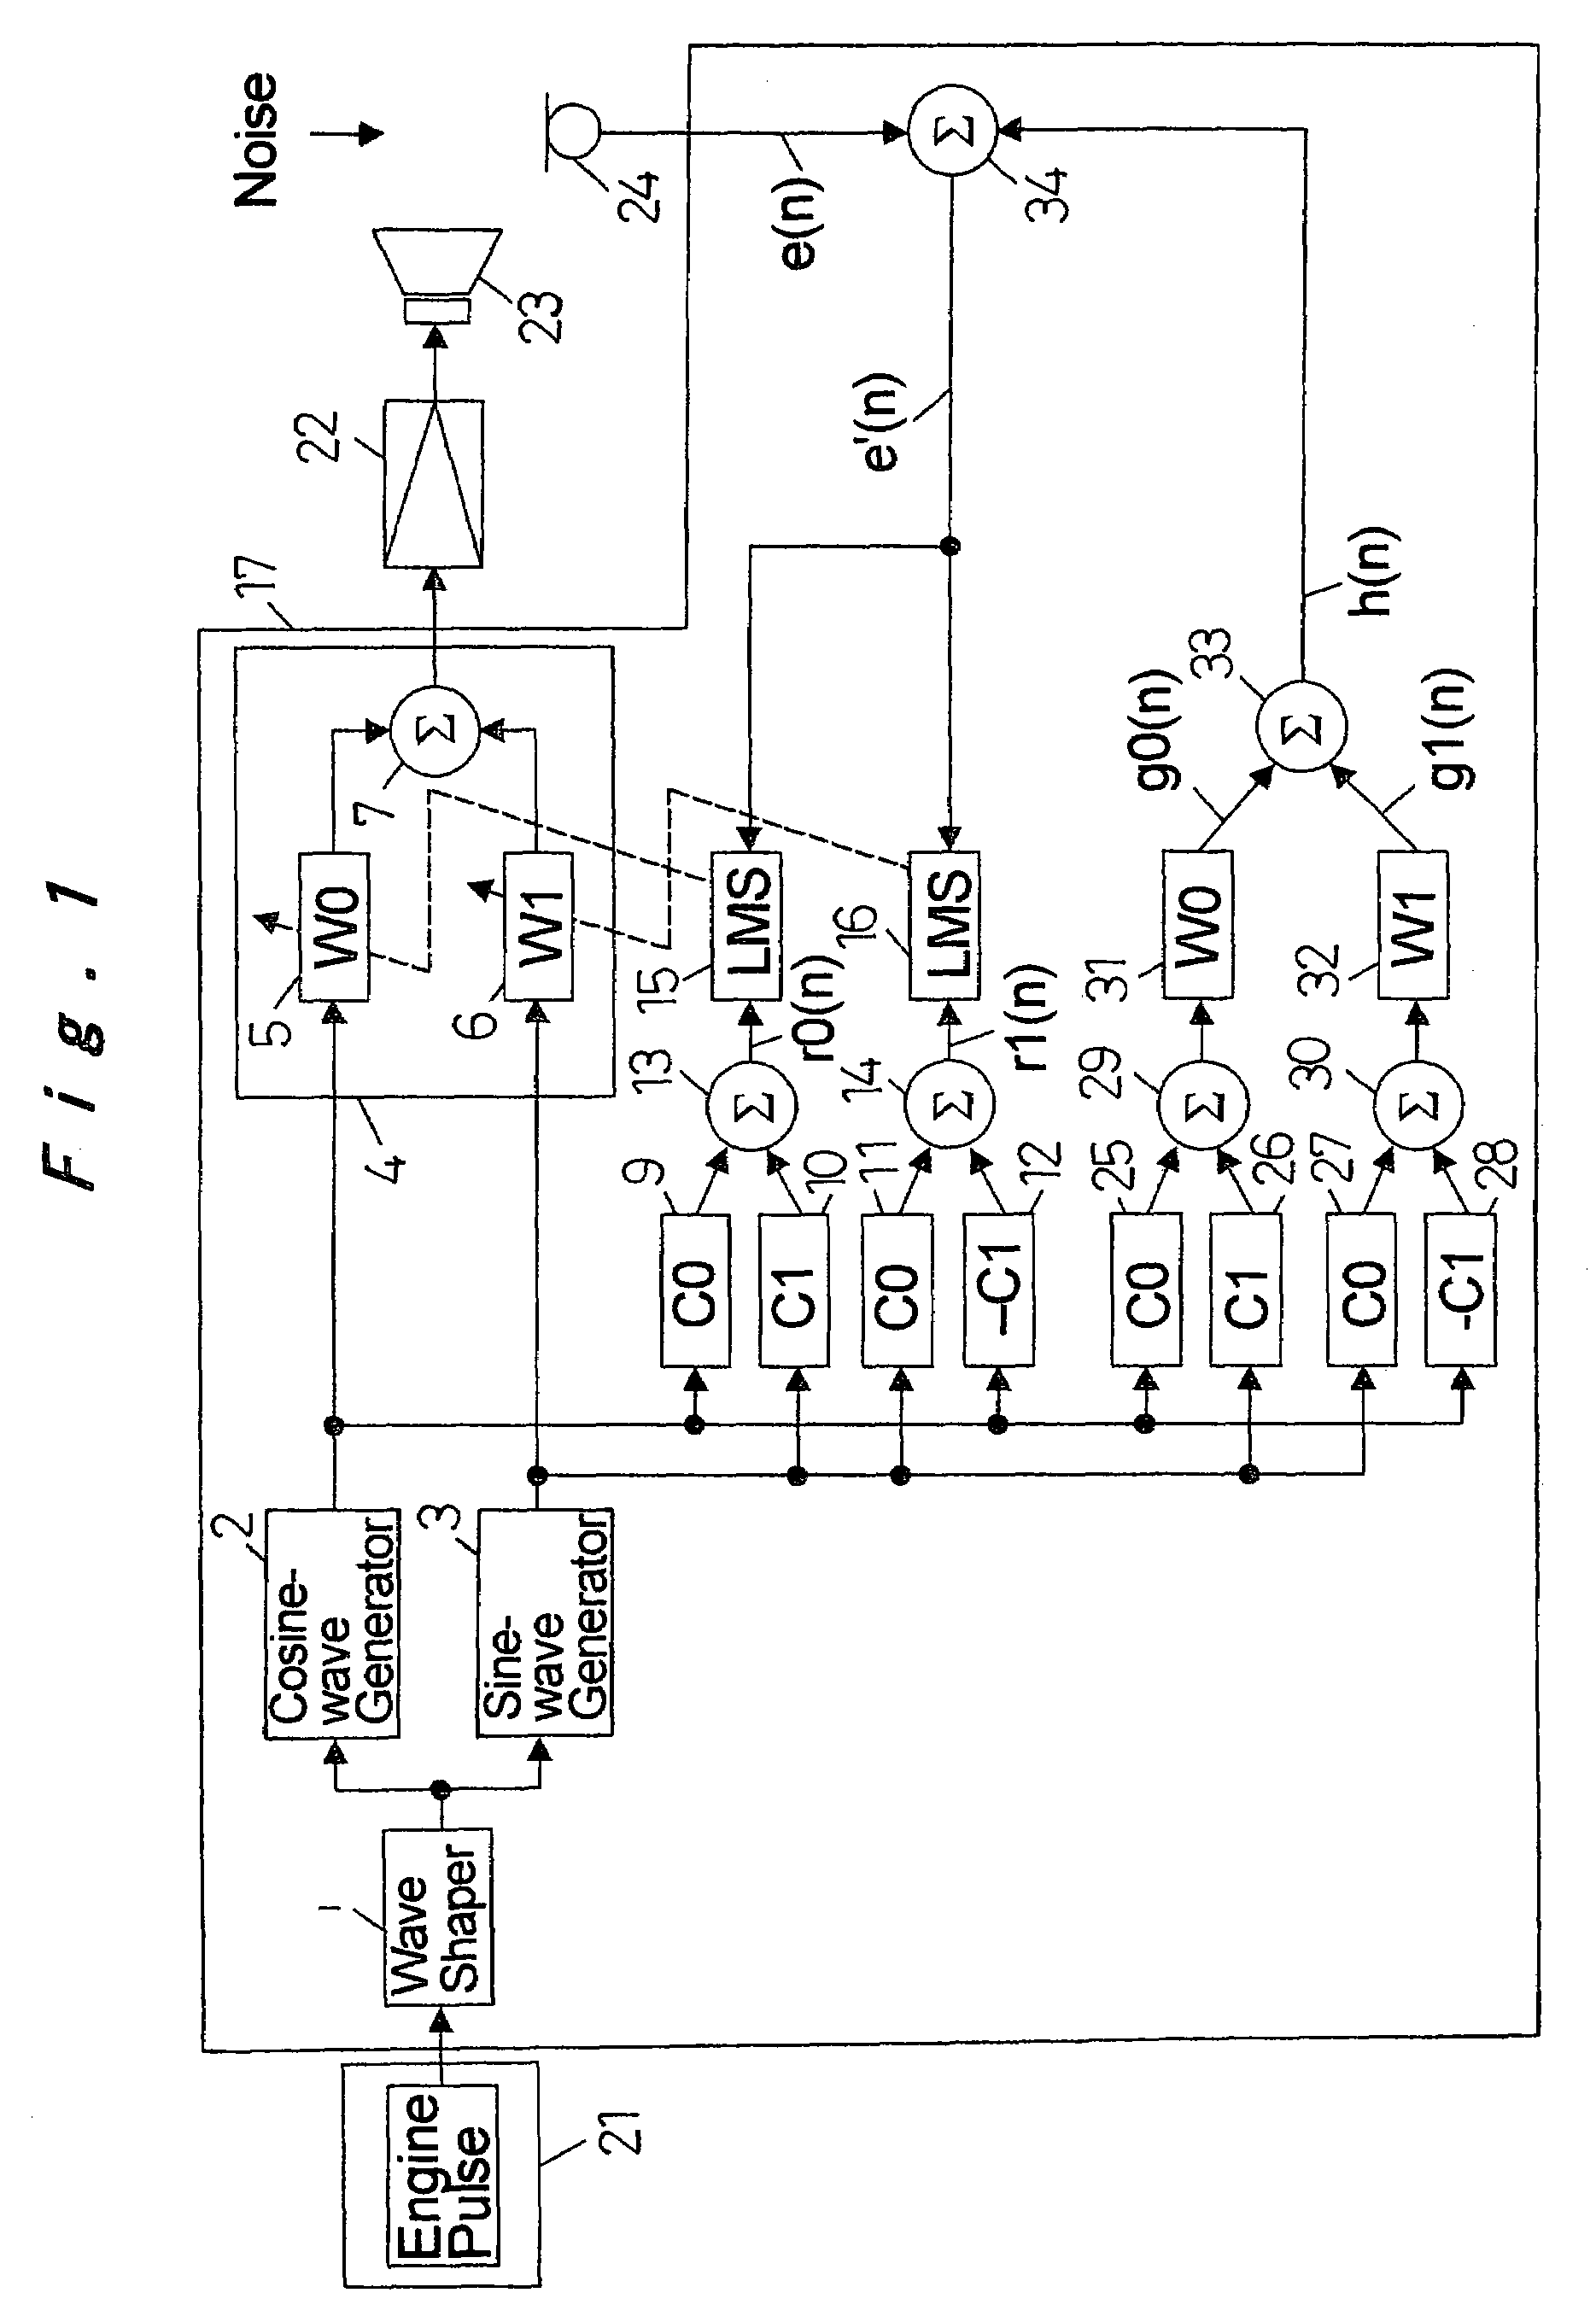 Active noise control system